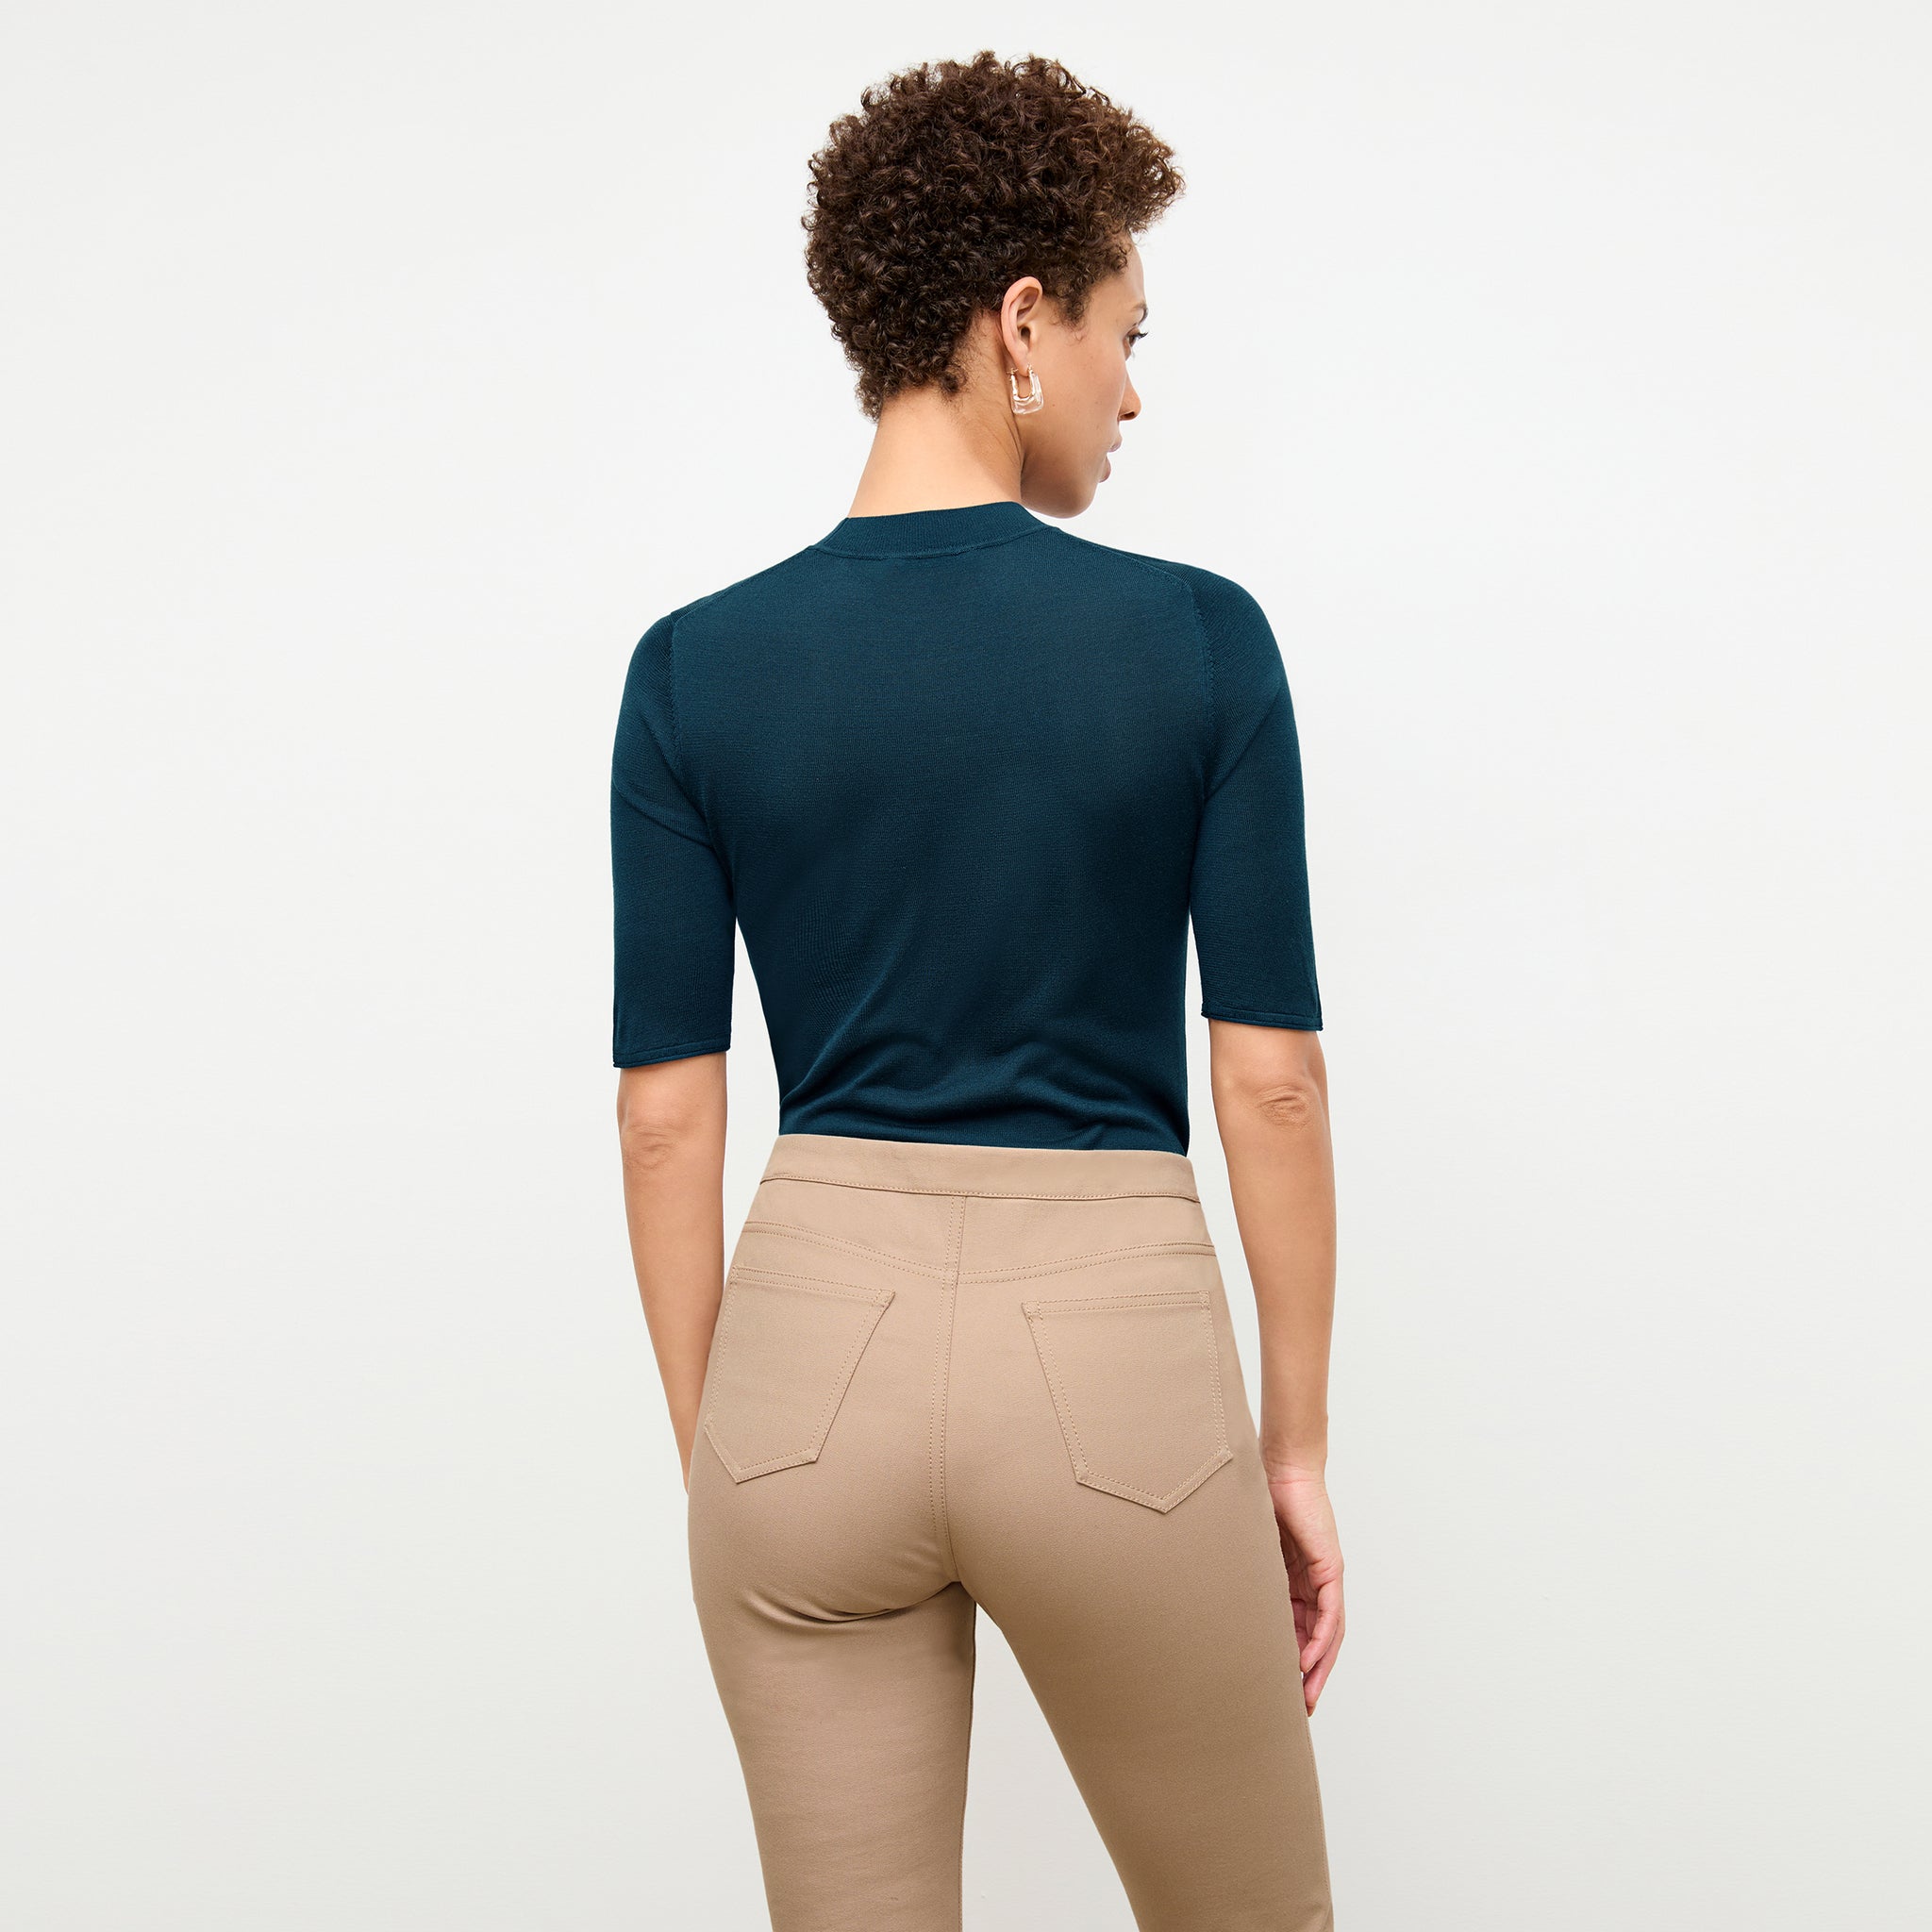 back image of a woman wearing the Hockley Jean in Fawn